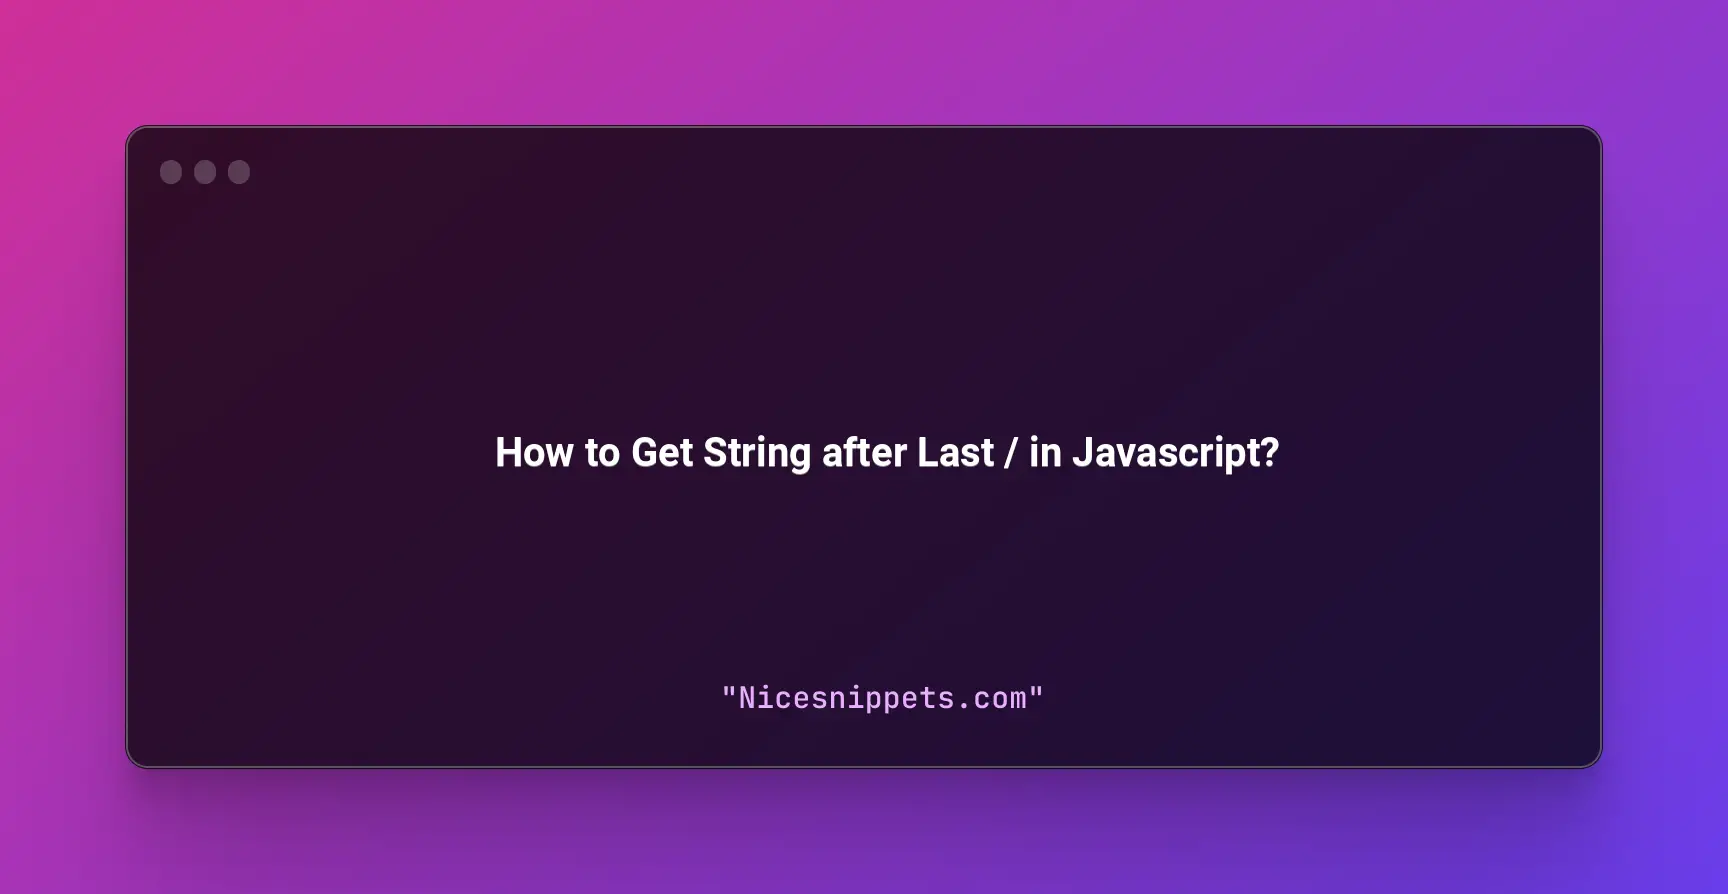 How to Get String after Last / in Javascript?